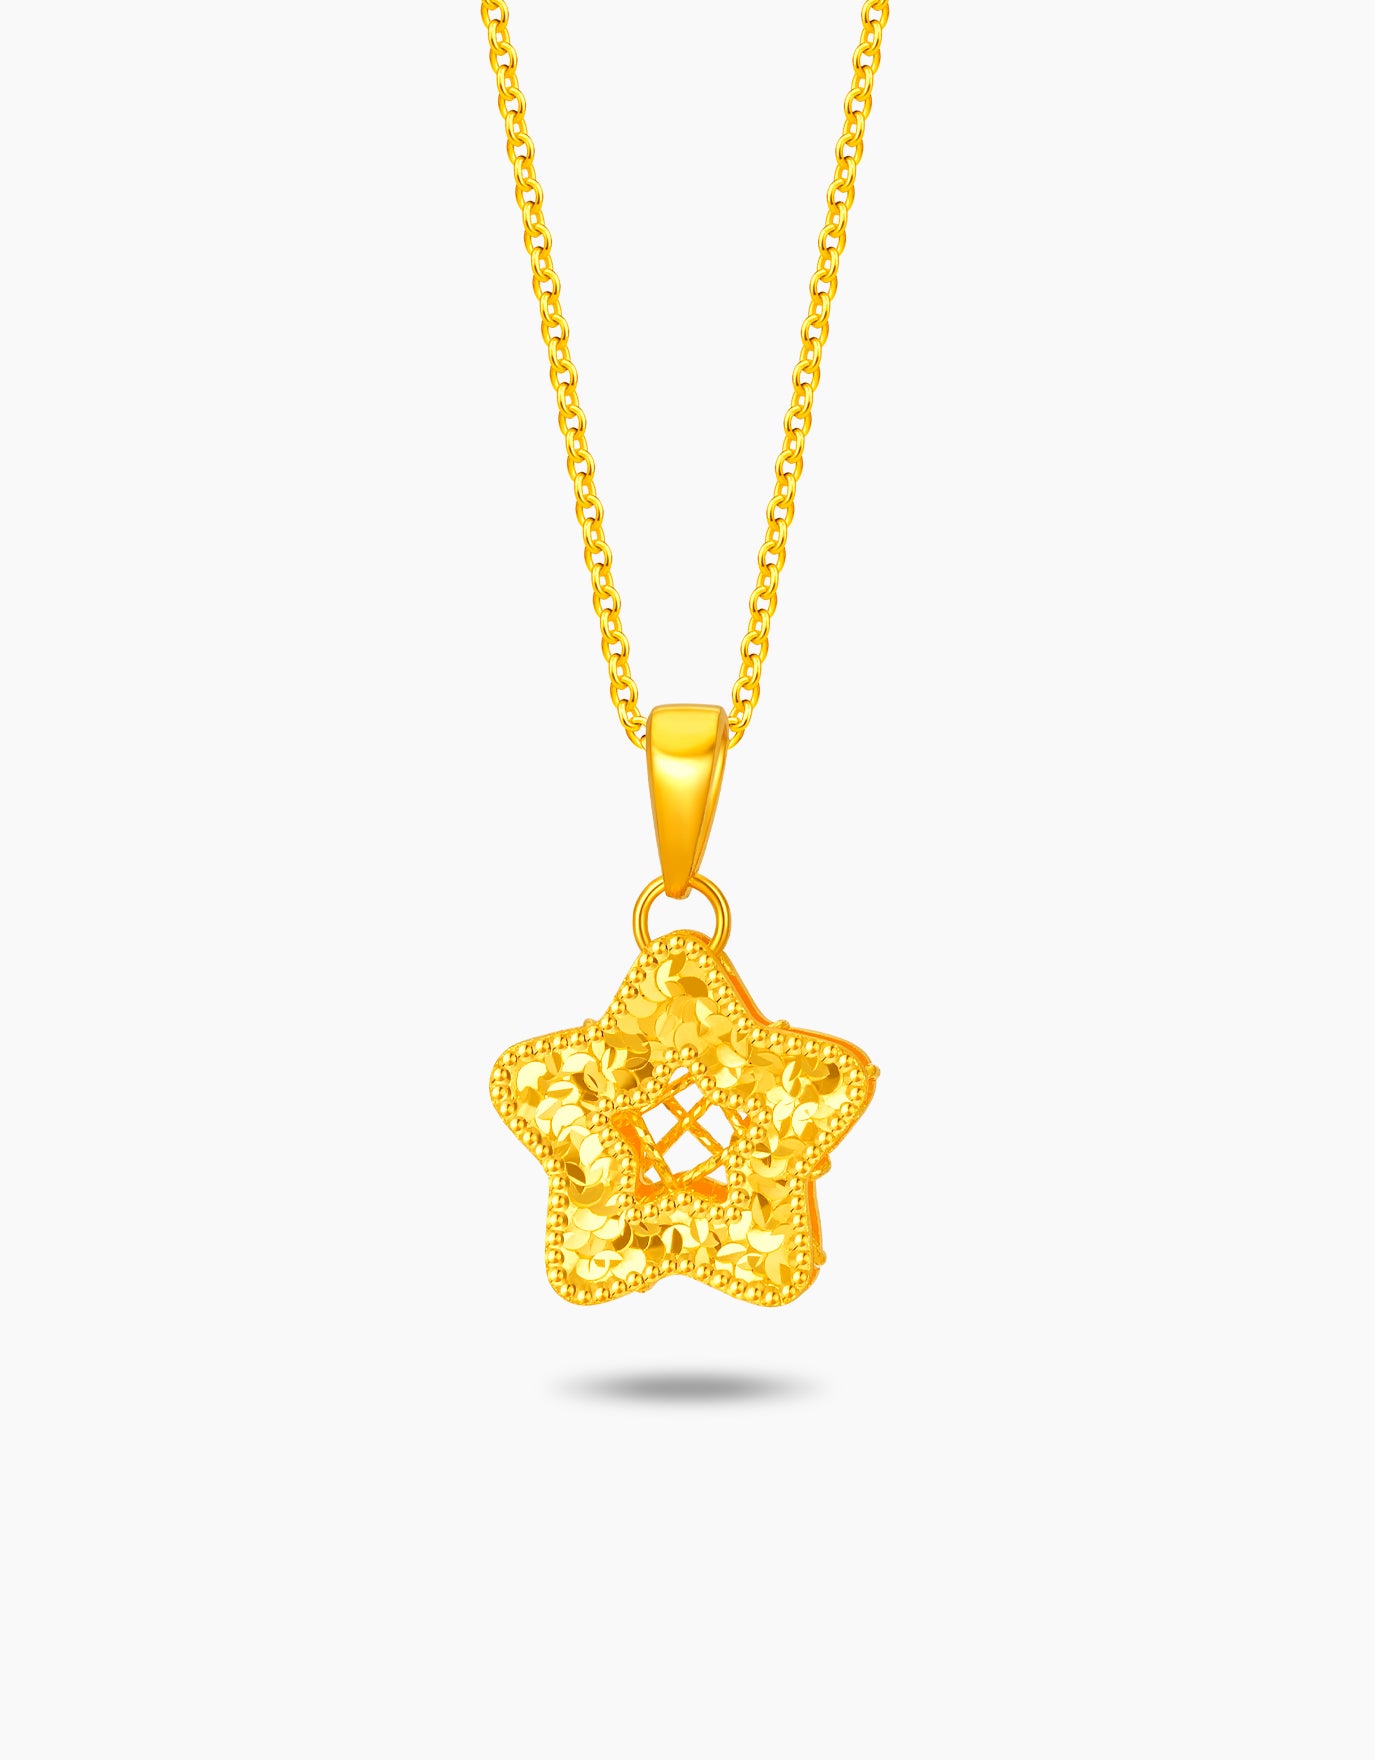 LVC 9IN Beaming Star 999 Gold Pendant